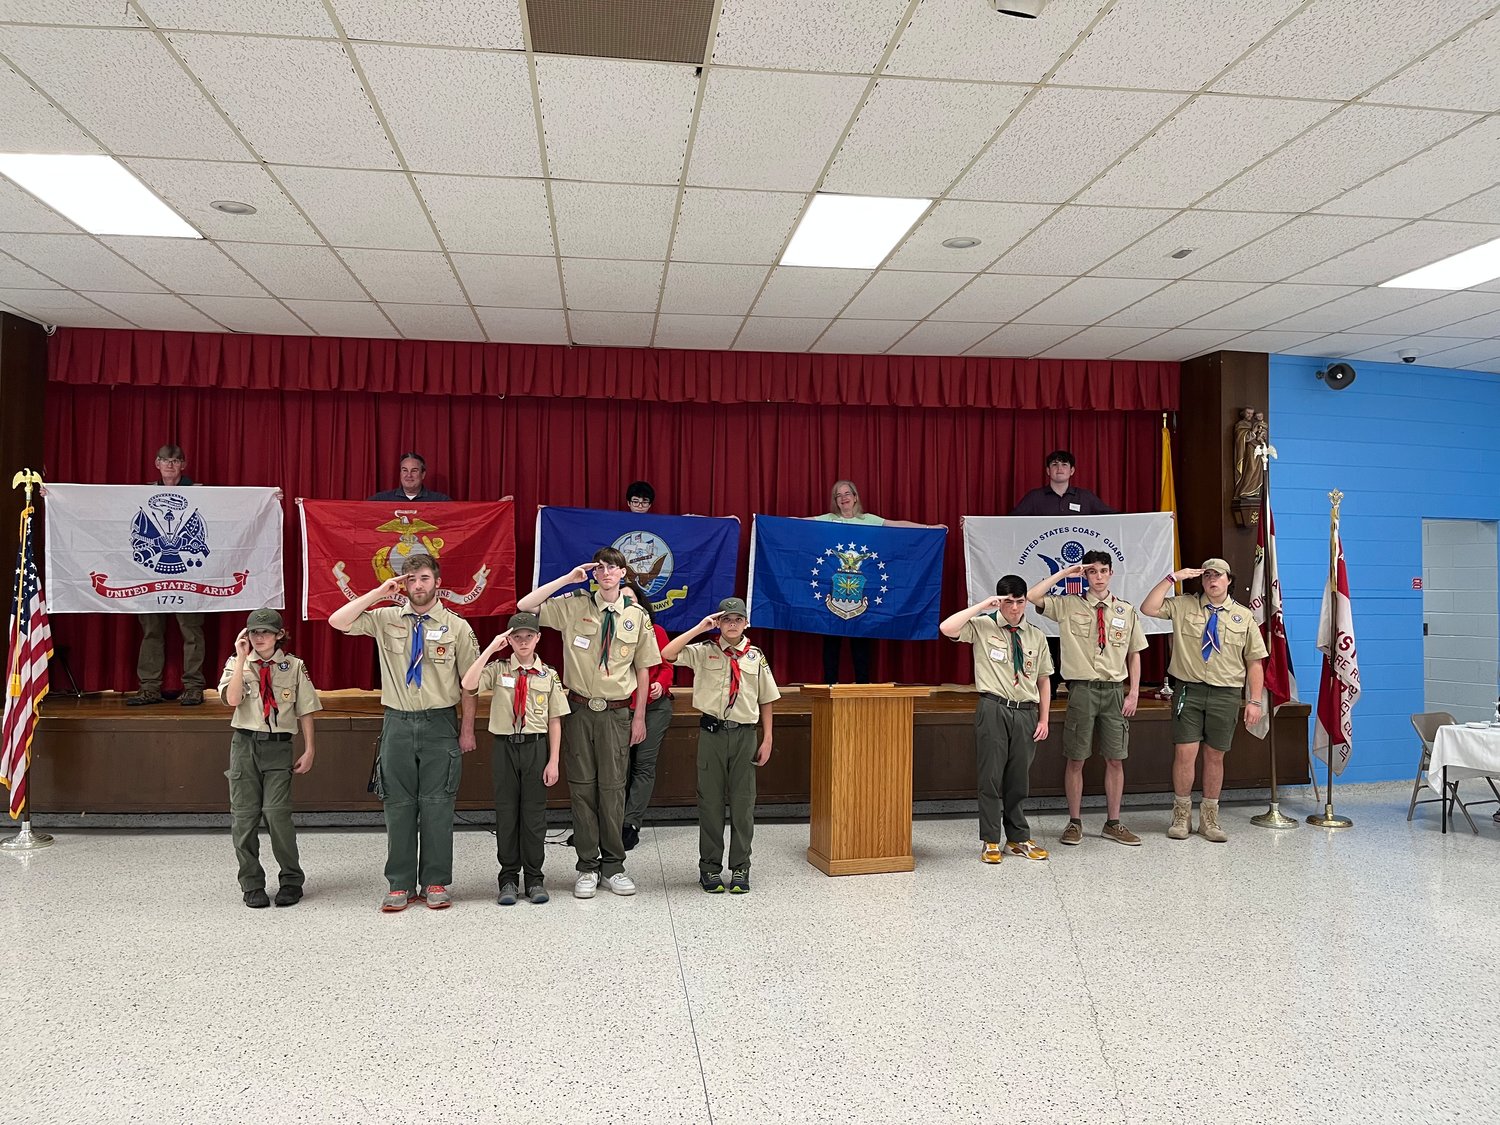 Members of Oyster Bay Boy Scout troops honored veterans at the Veterans Day dinner at Saint Dominic Church, amid the playing of the anthems of the different branches.